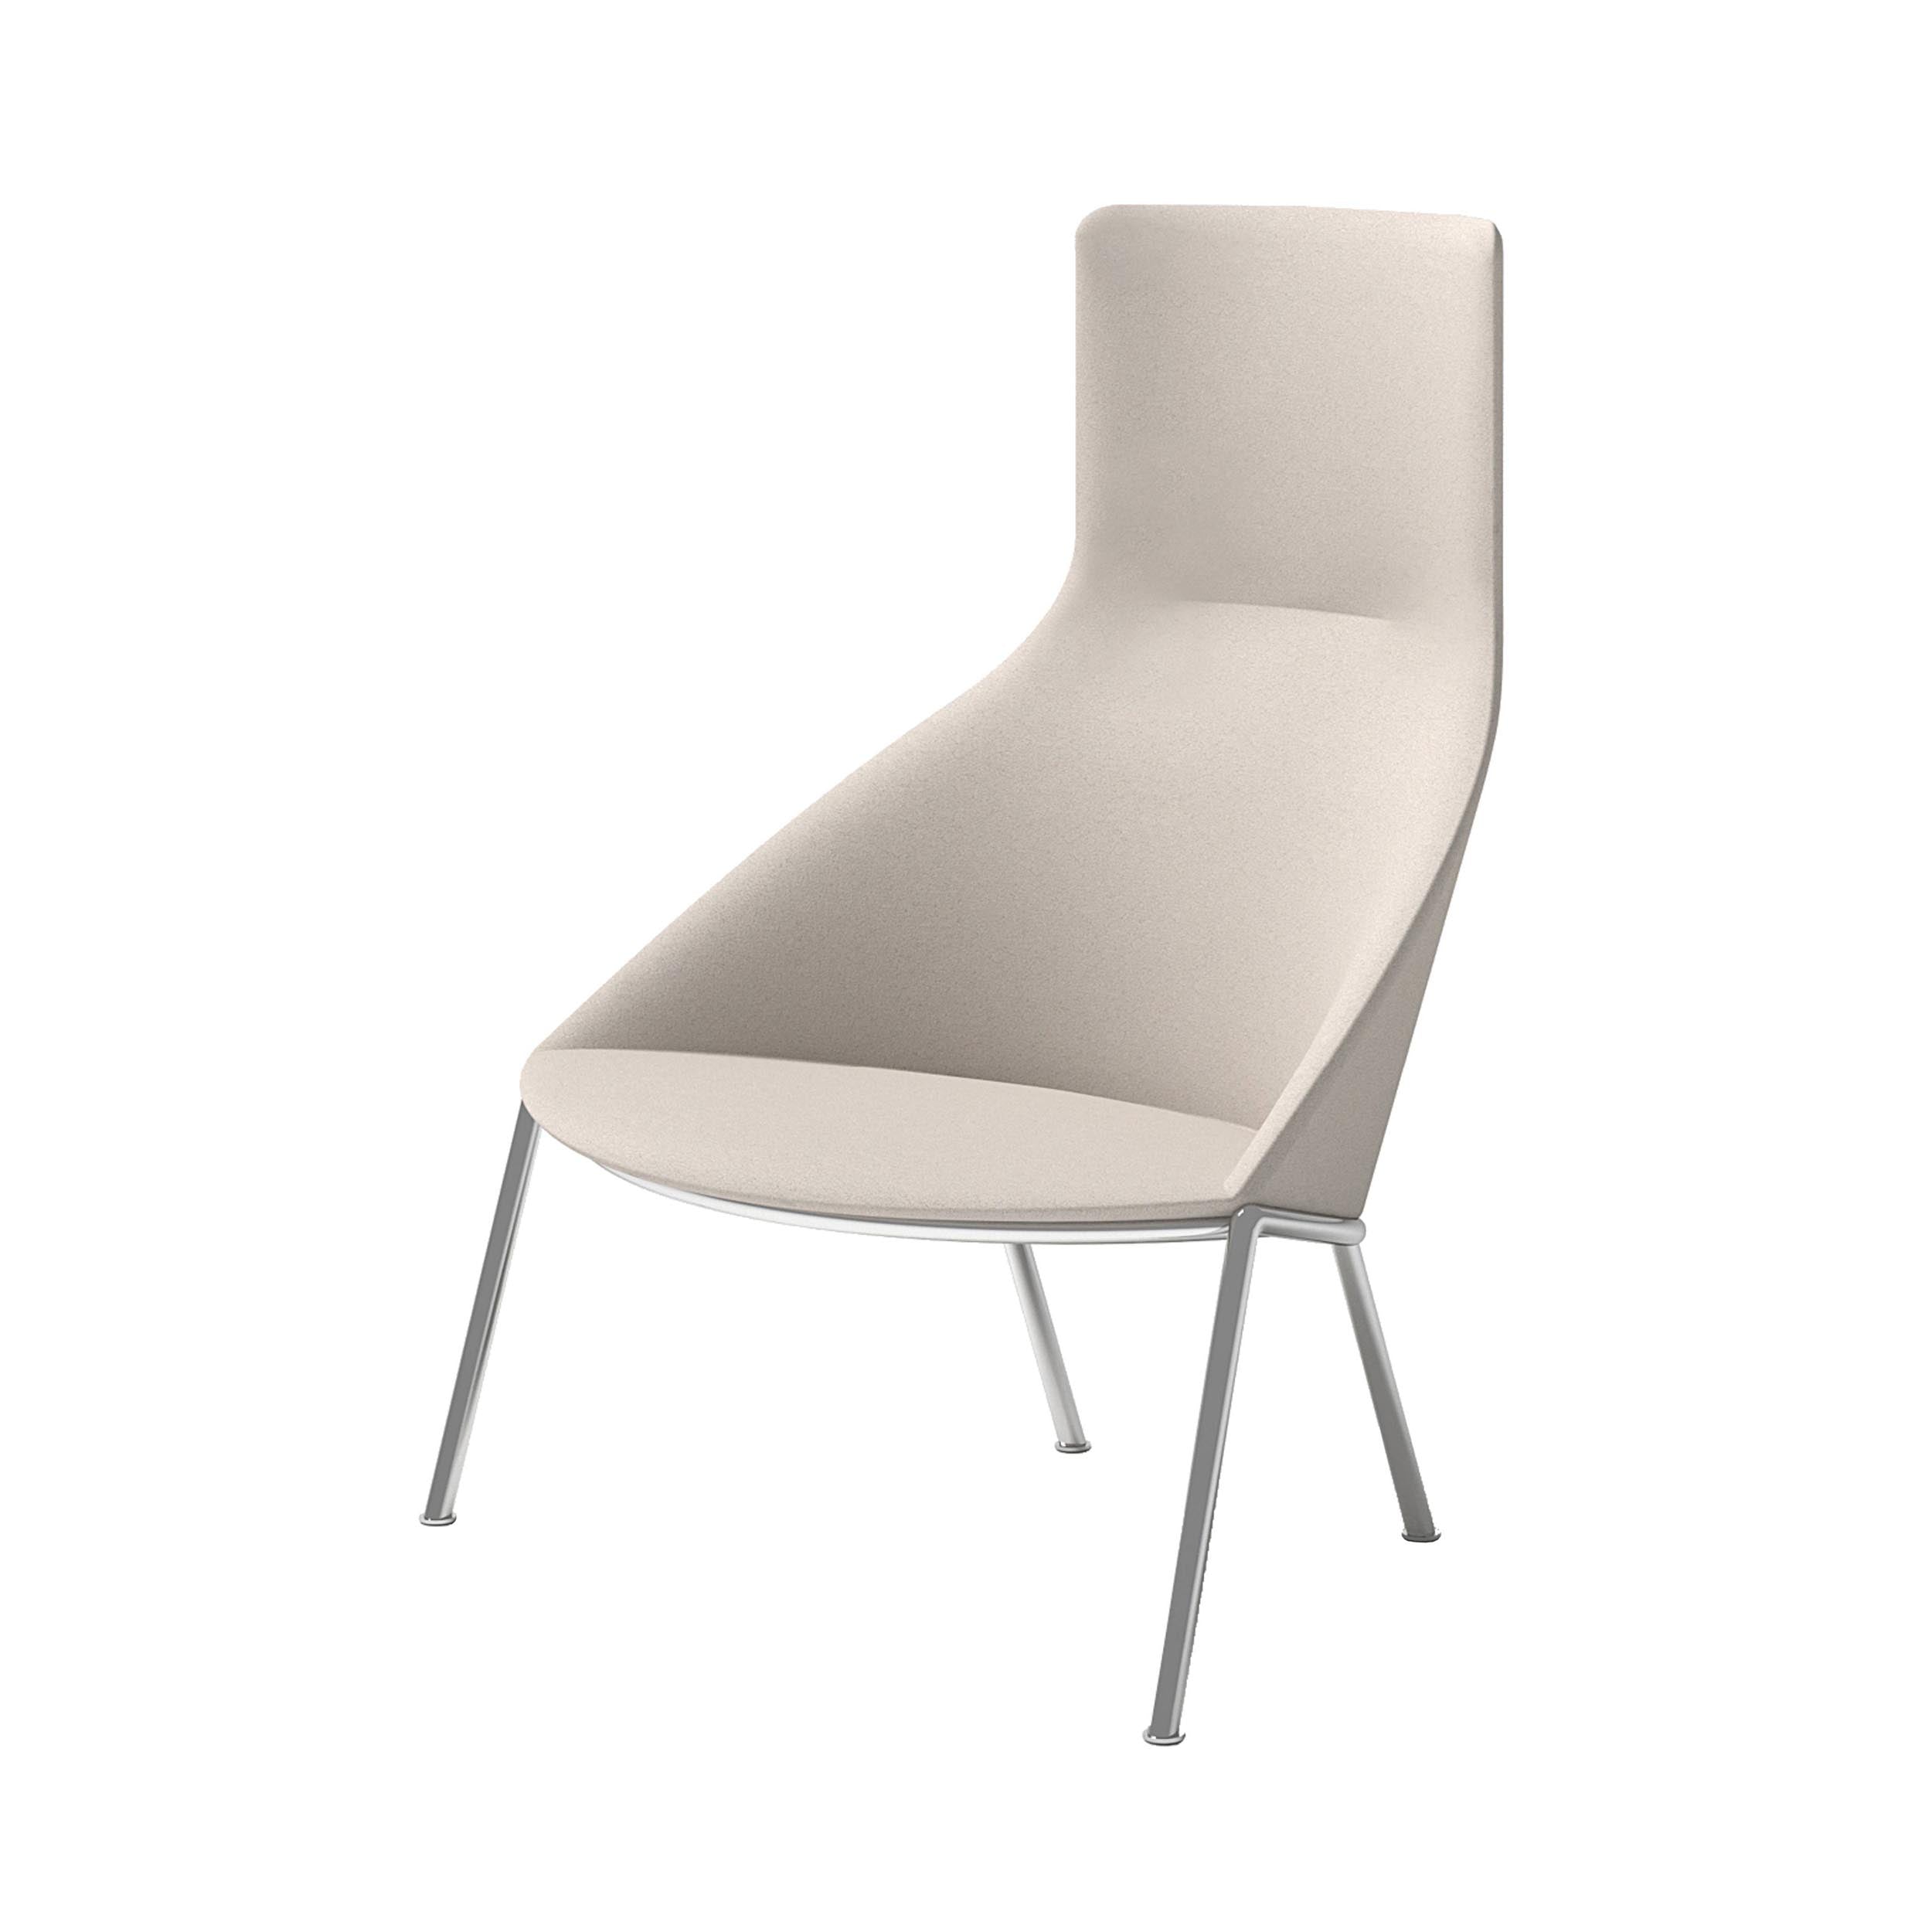 Circa Highback Lounge Chair: Without Armrest + Chrome